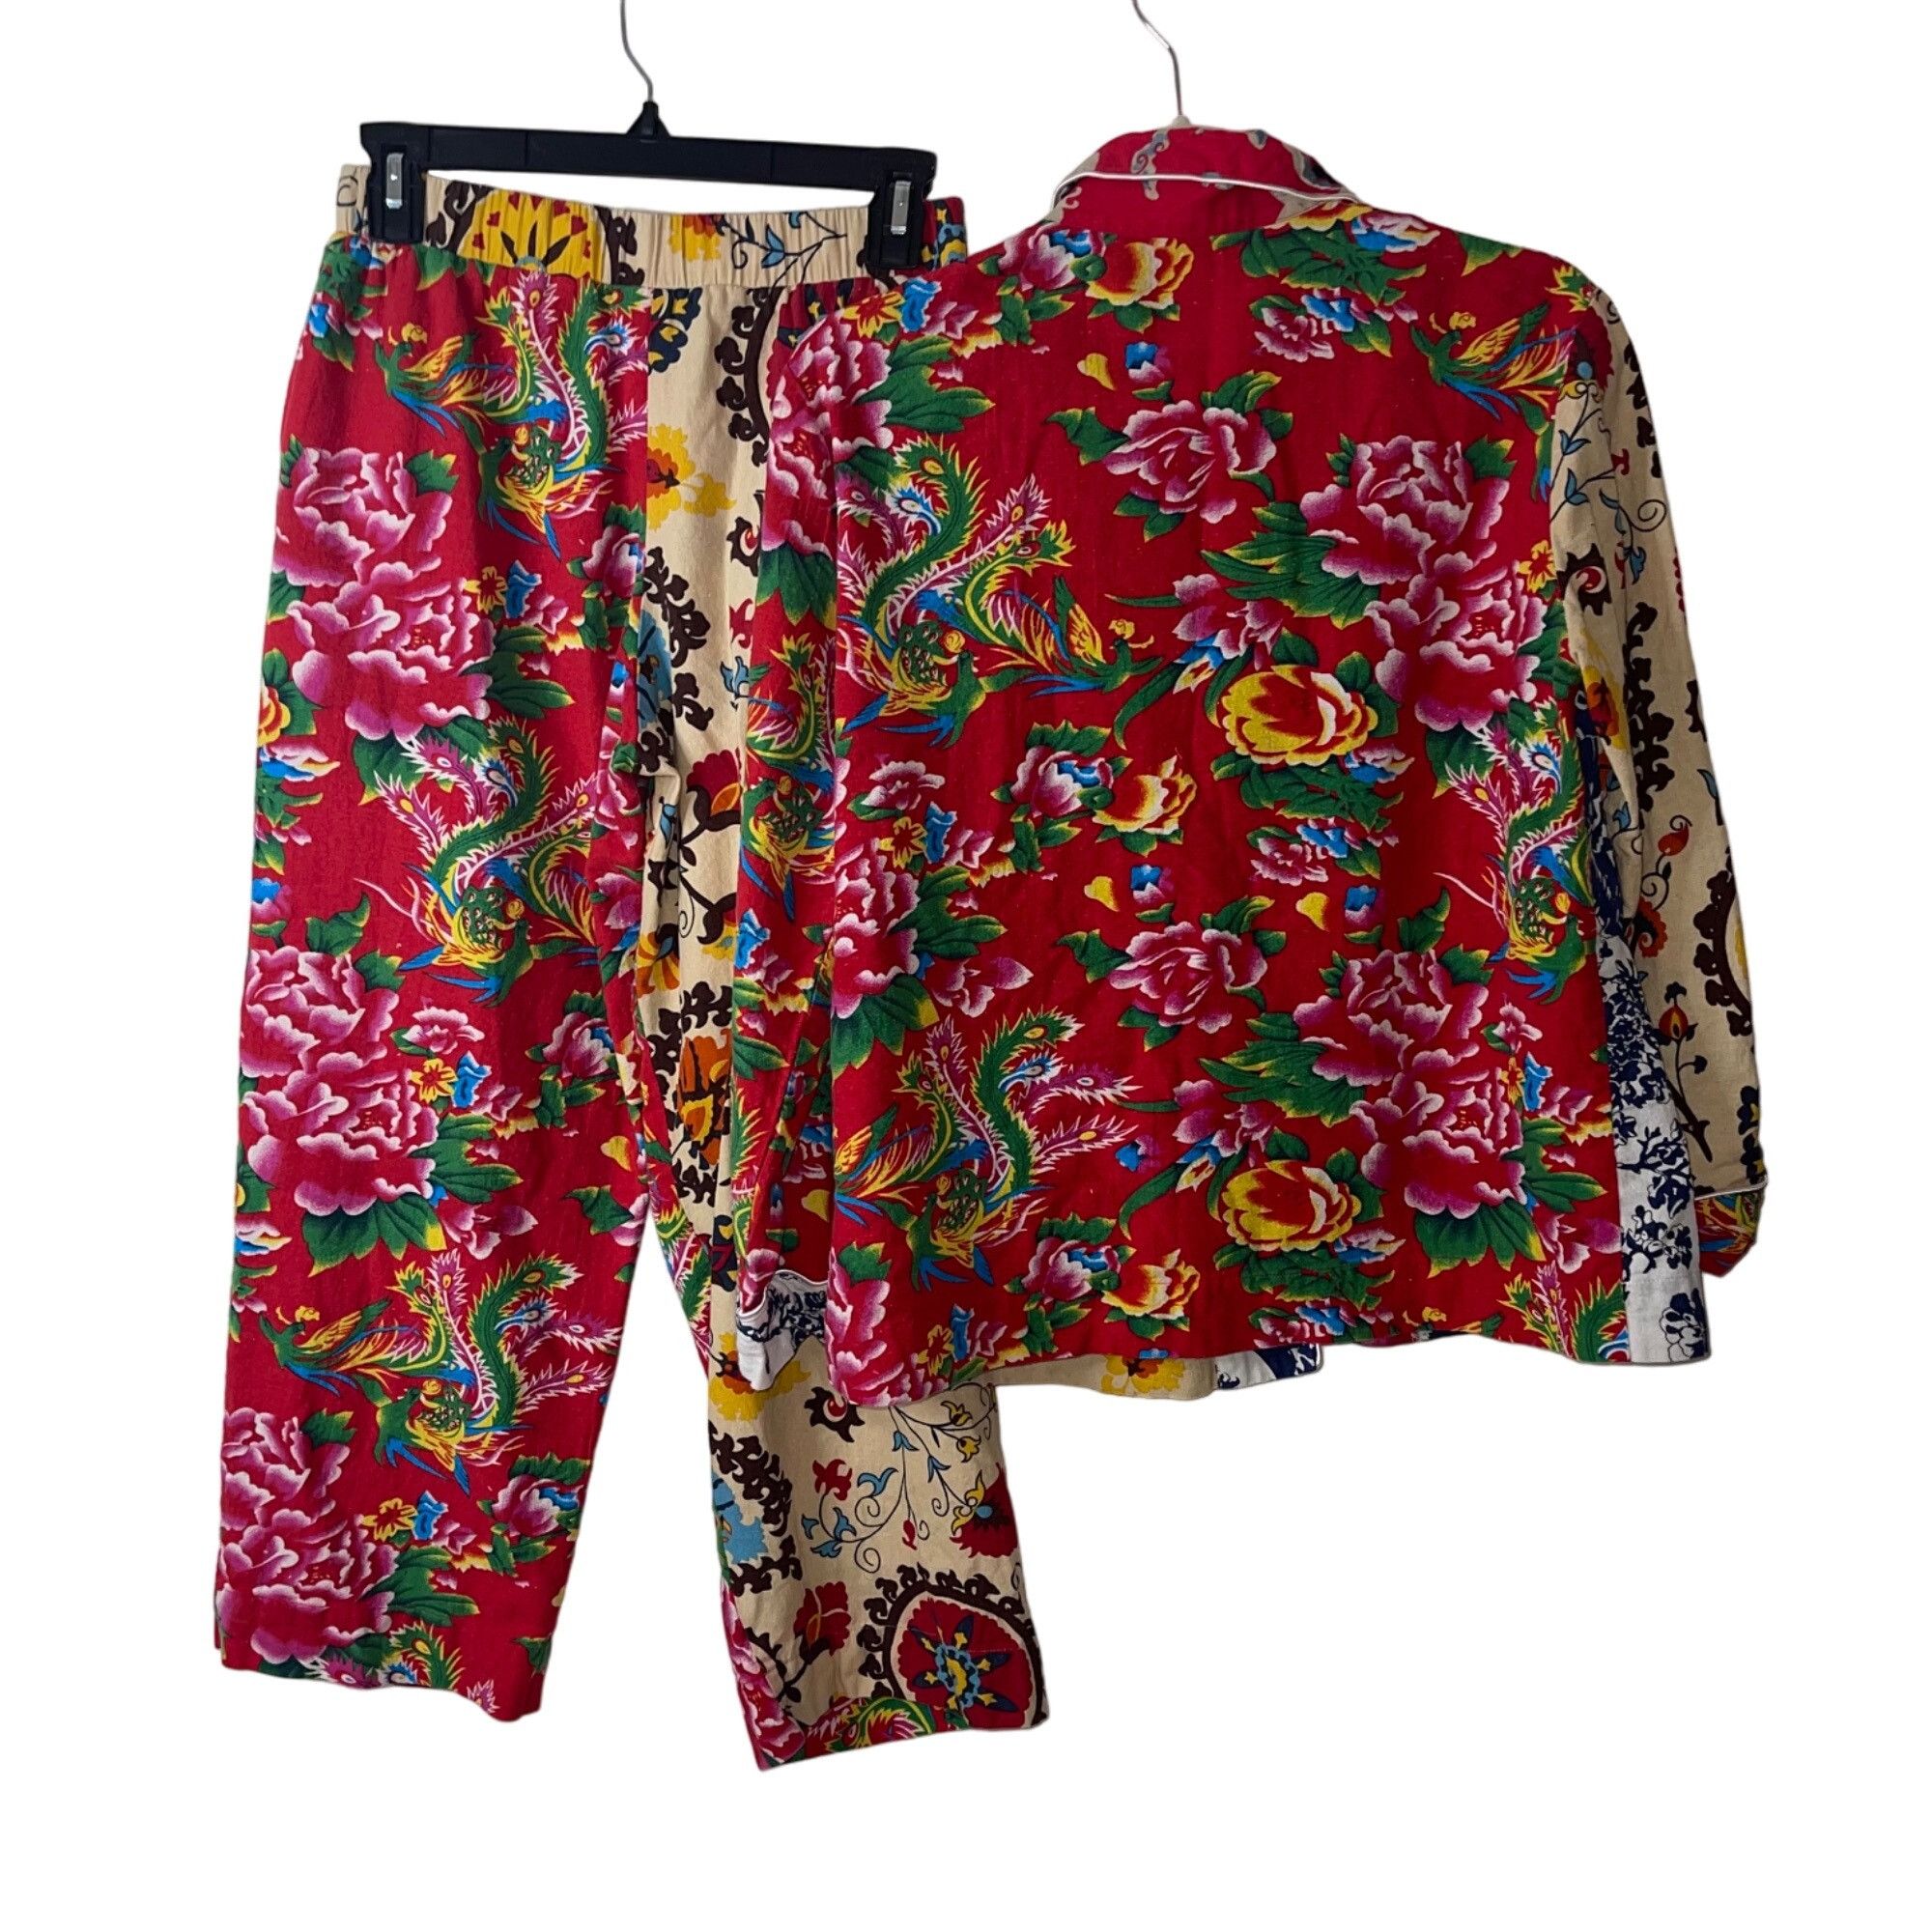 Other Benjimu Womens Pajama Set Size Small Multicolor Mixed Print Size ONE SIZE - 2 Preview